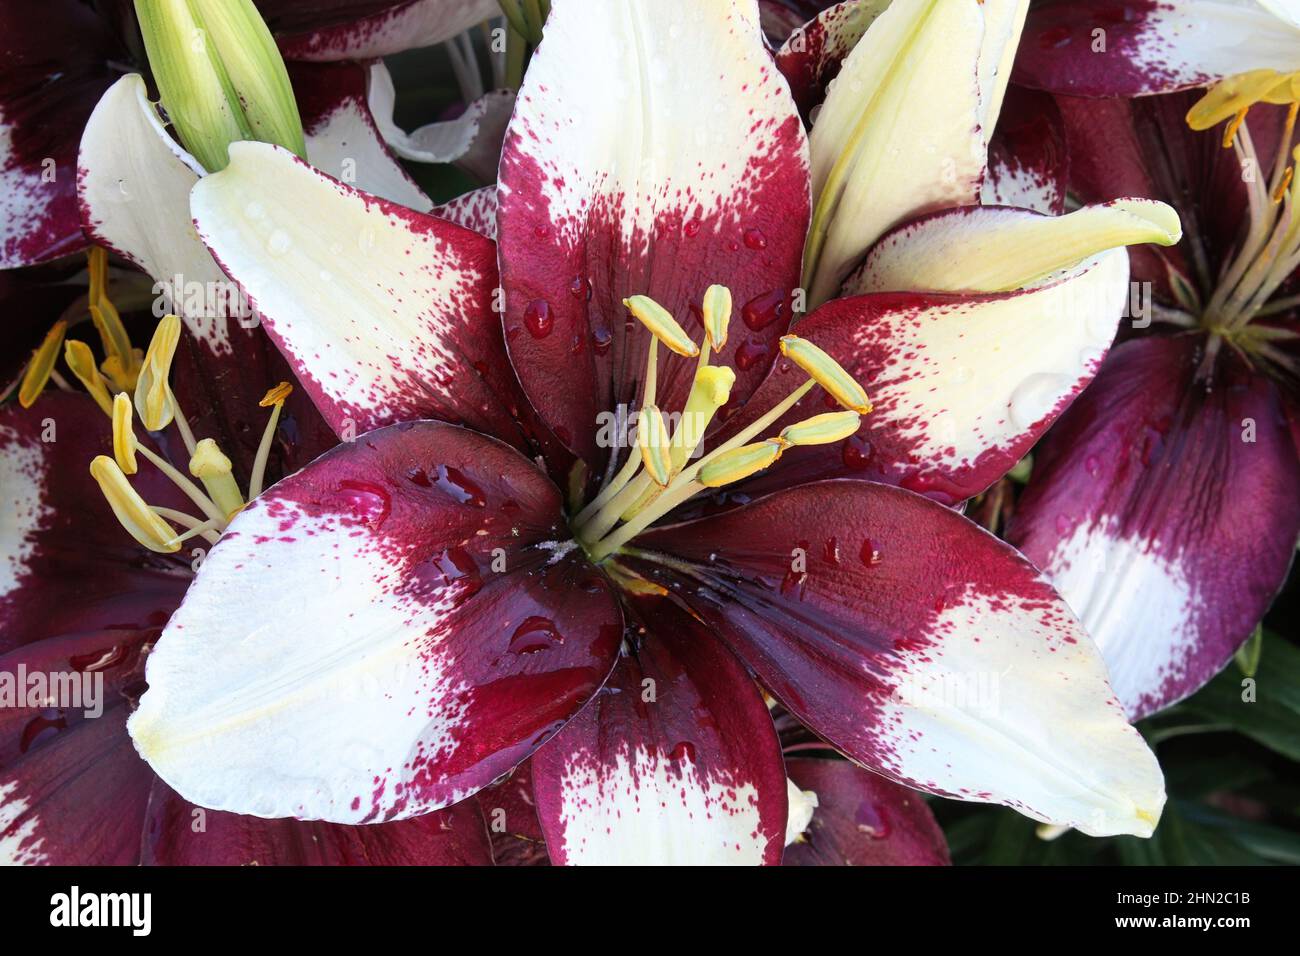 Closeup view of purple and white lily plants Stock Photo